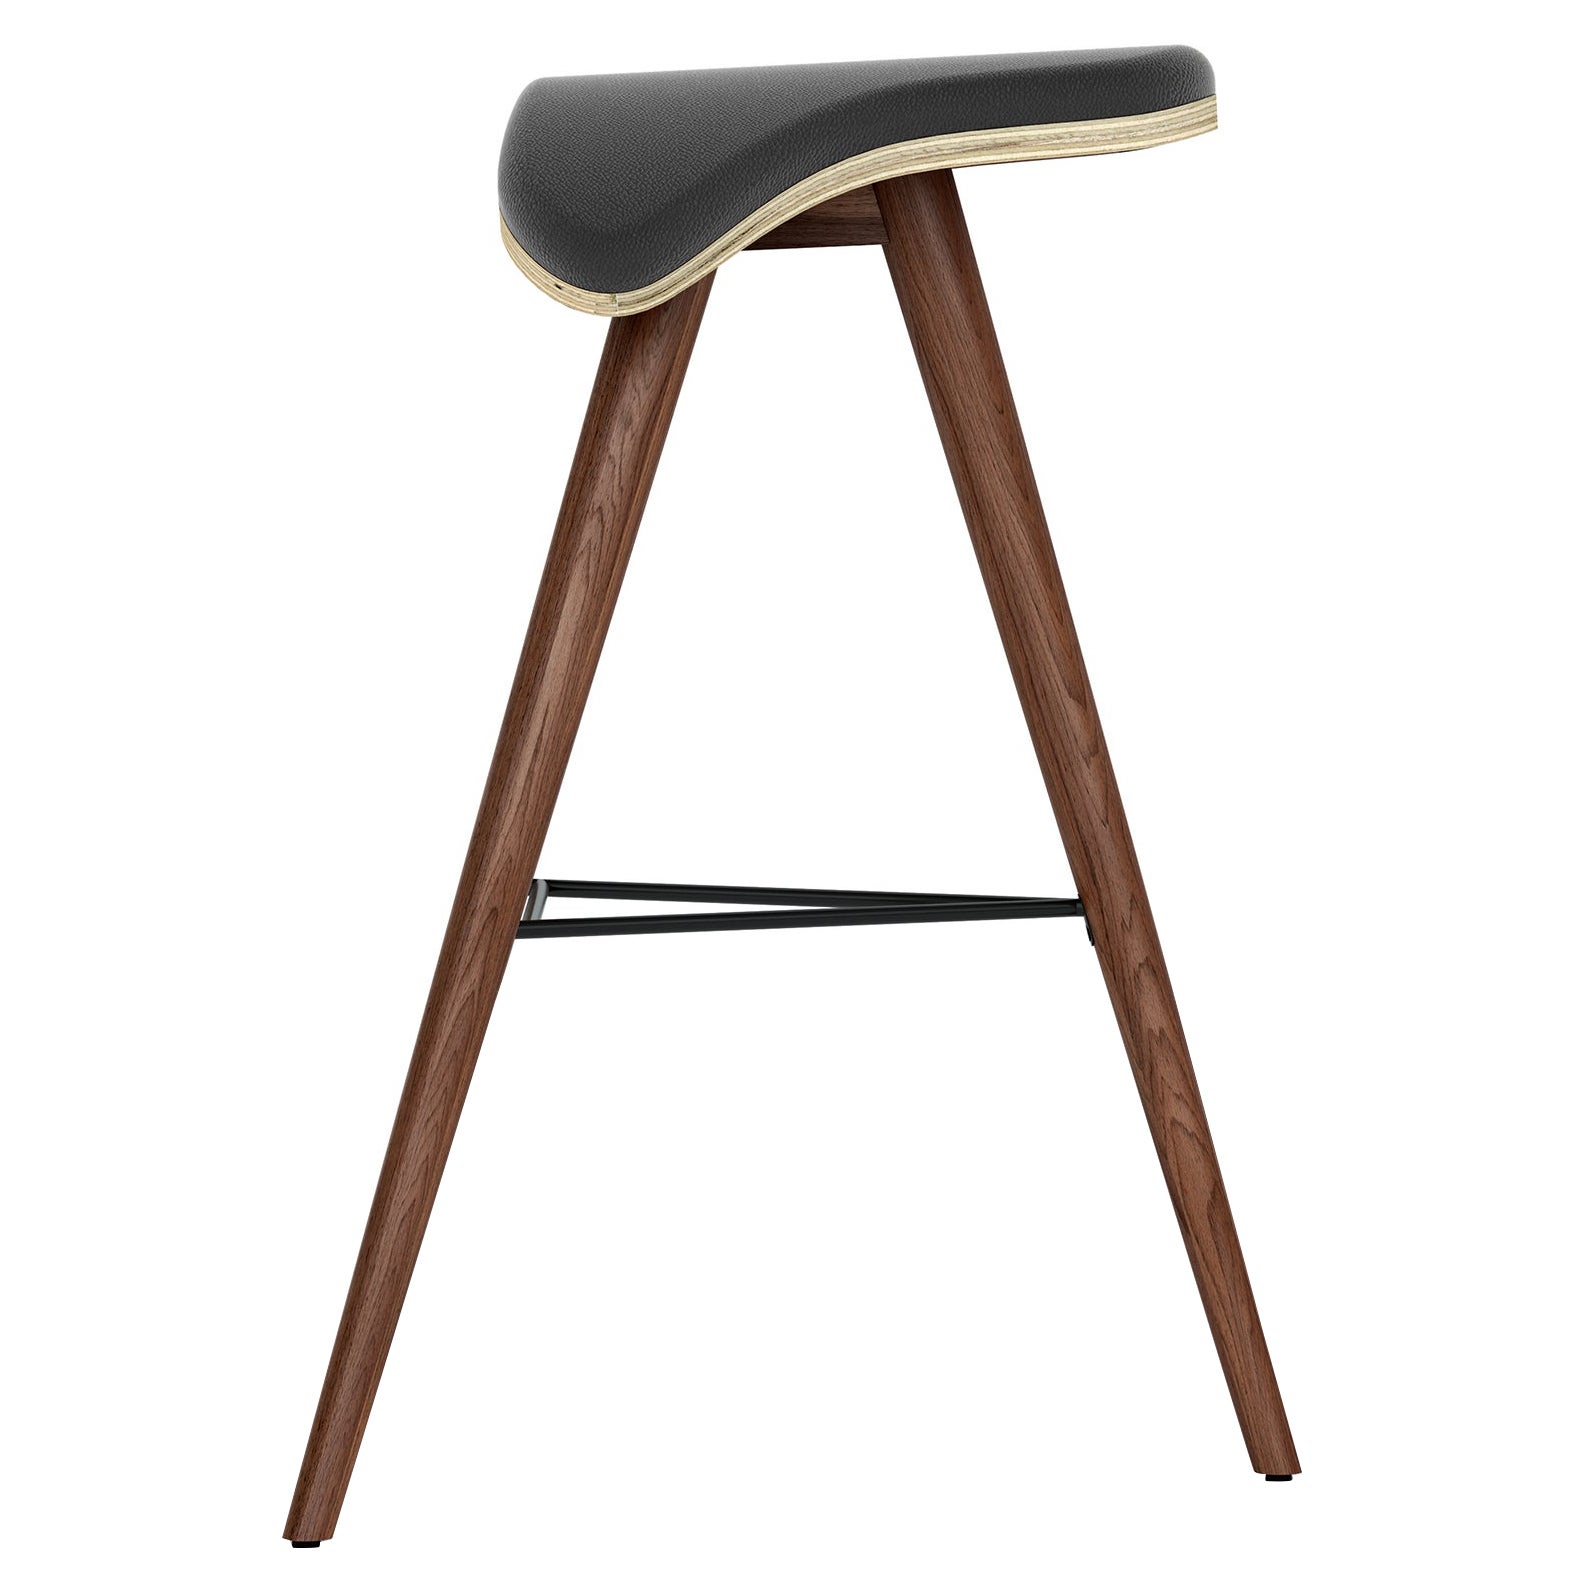 Horse Stool High in Walnut and Black Leather by AROUNDtheTREE